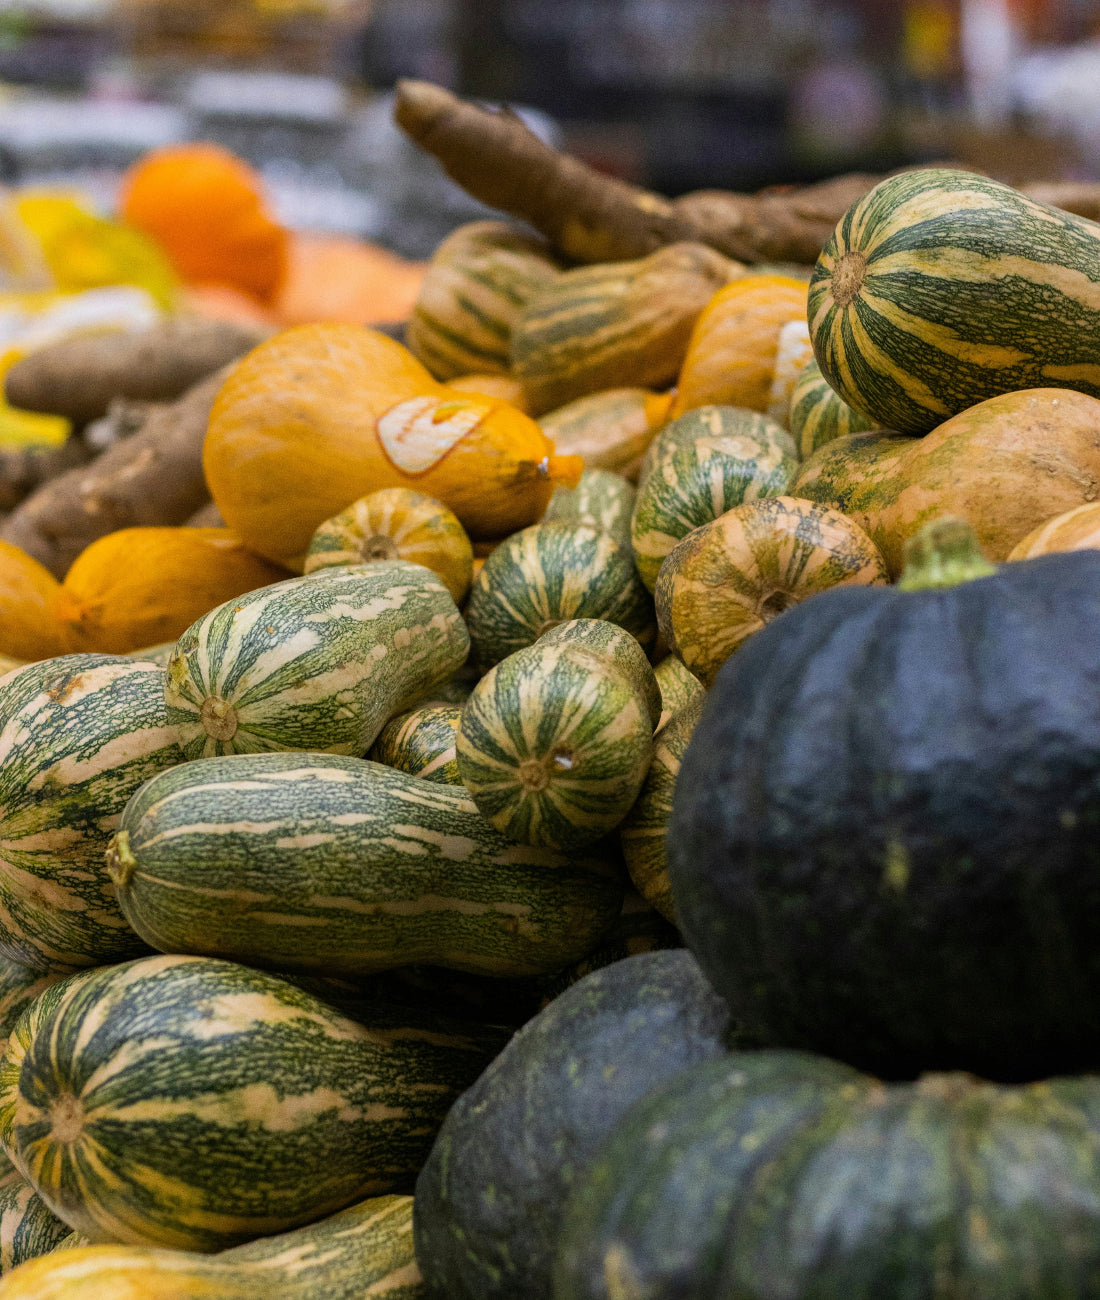 A table with several different kinds of winter squash at a farmers market